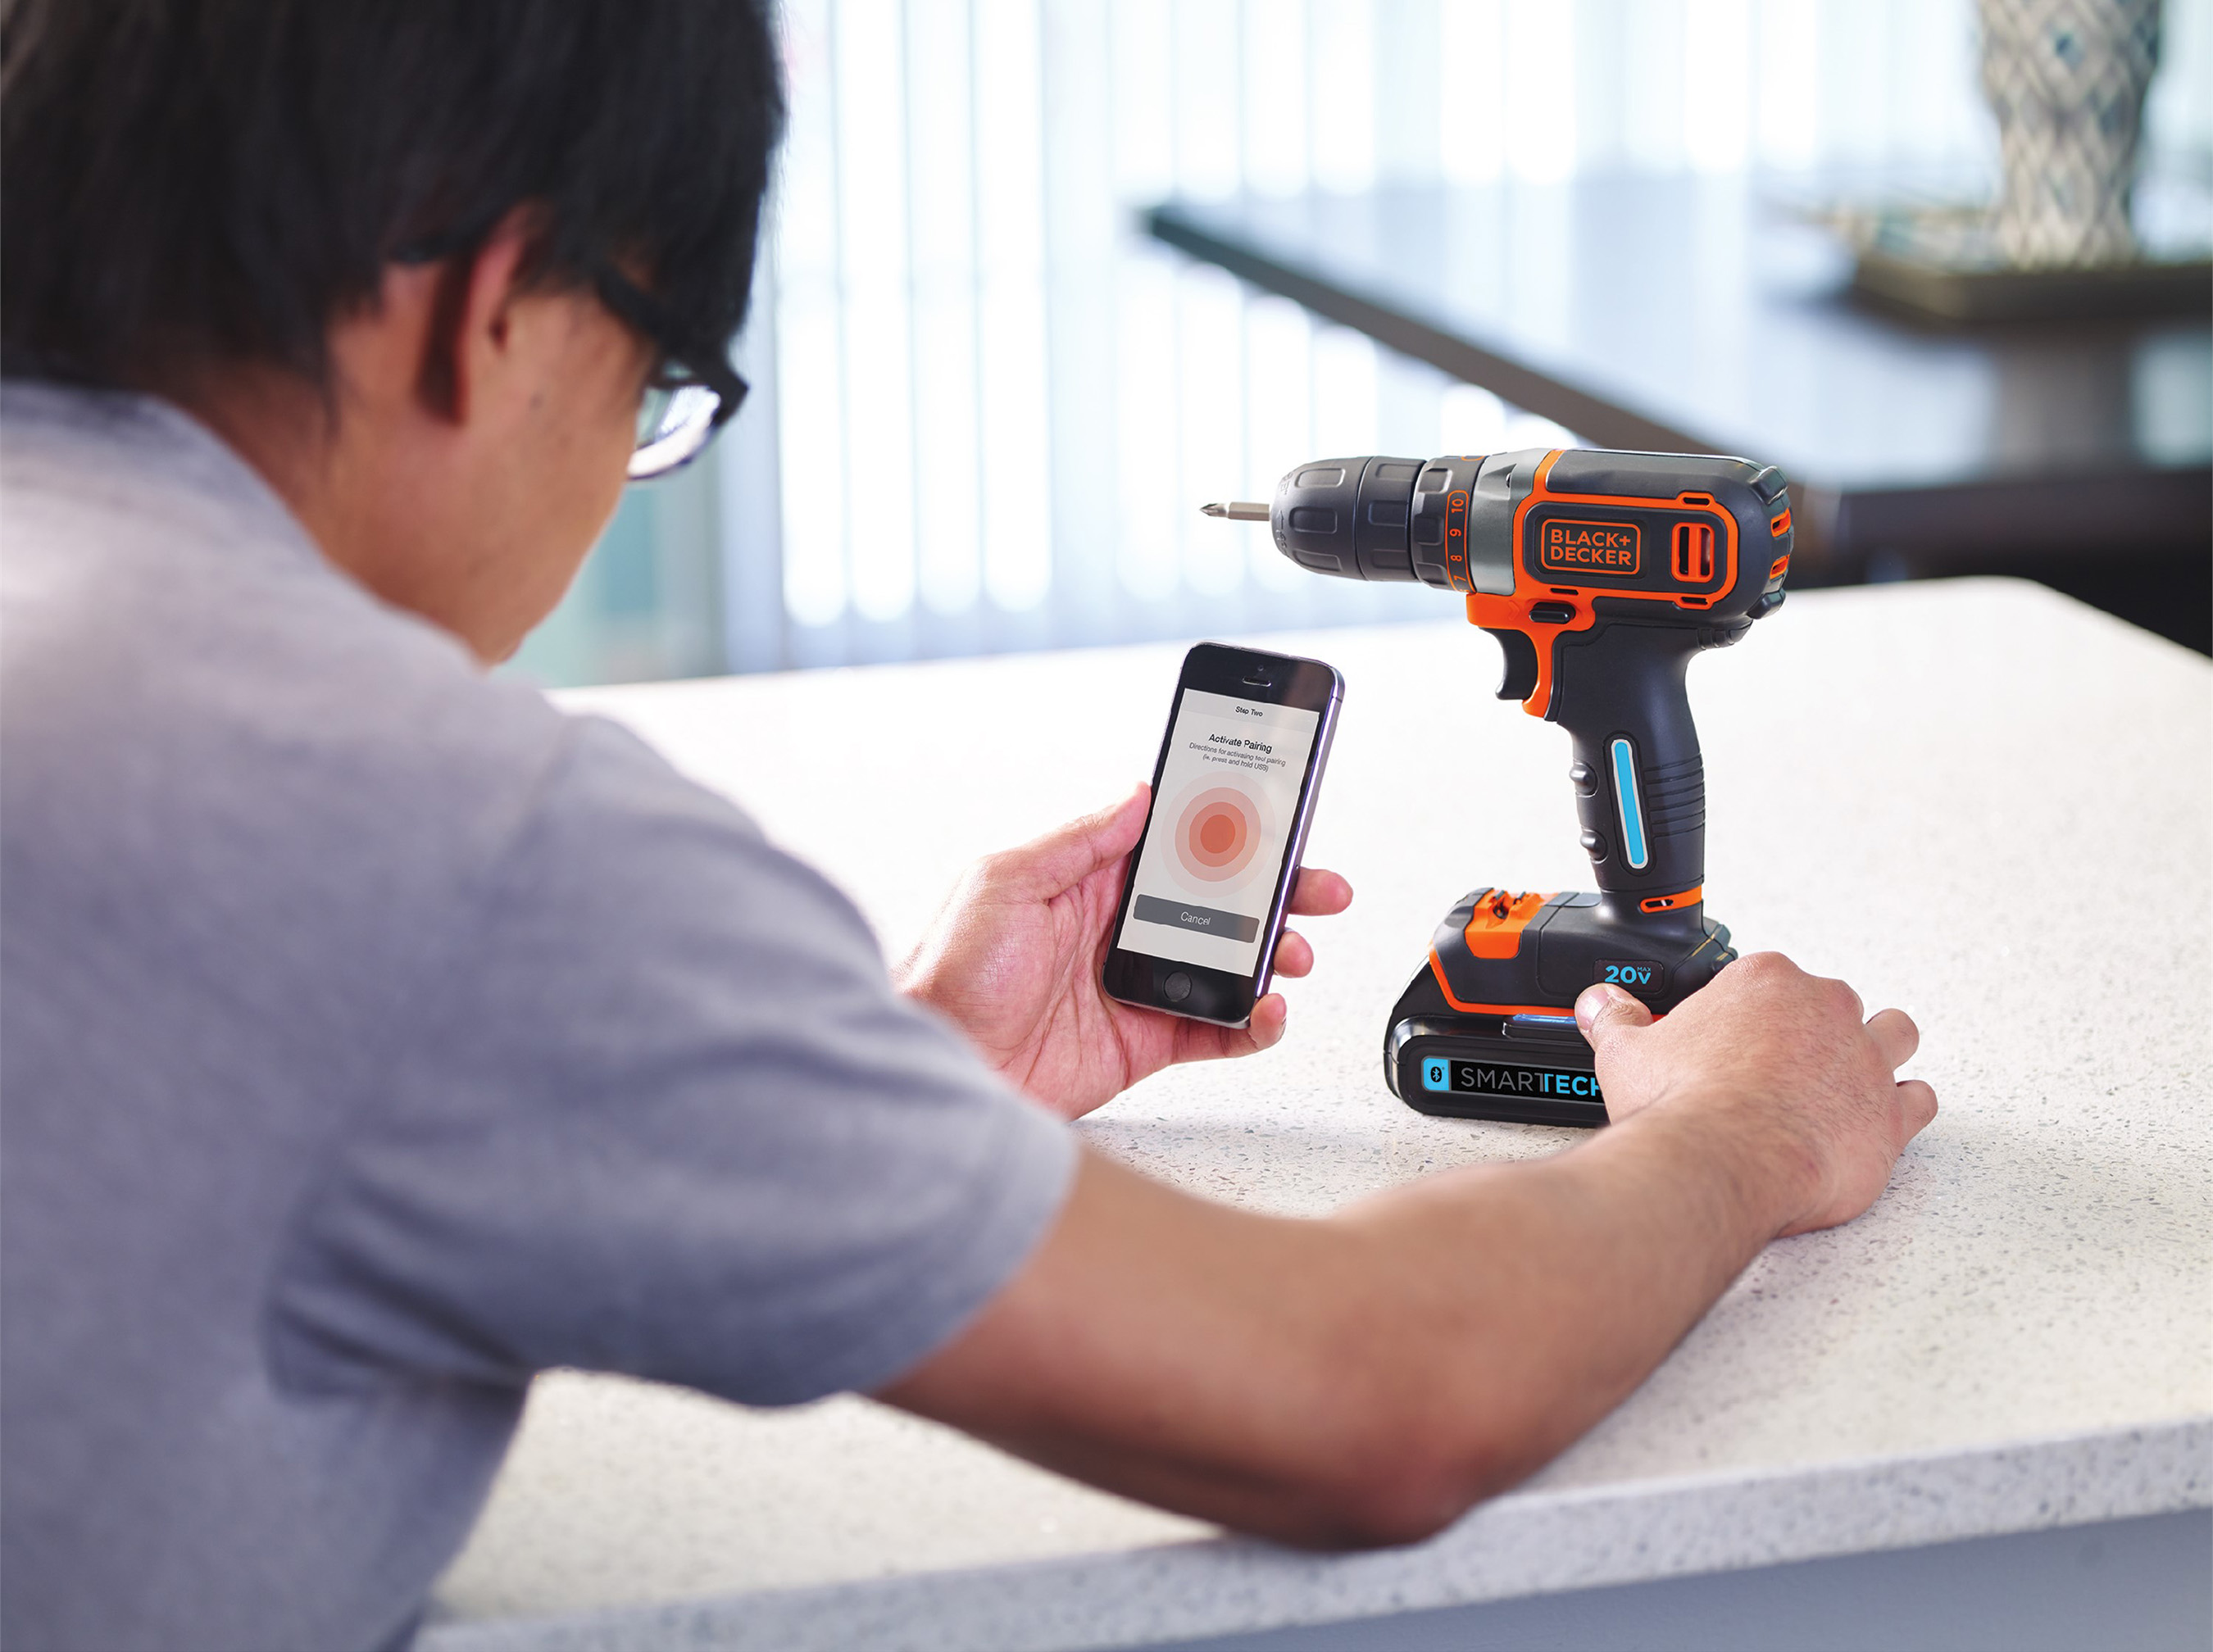 The free BLACK+DECKER™ Mobile App has three components: My Products, Messages, and Projects. Combined with the new SMARTECH™ Battery USB charging feature, the app and batteries connect tools with technology to enhance the DIY experience.